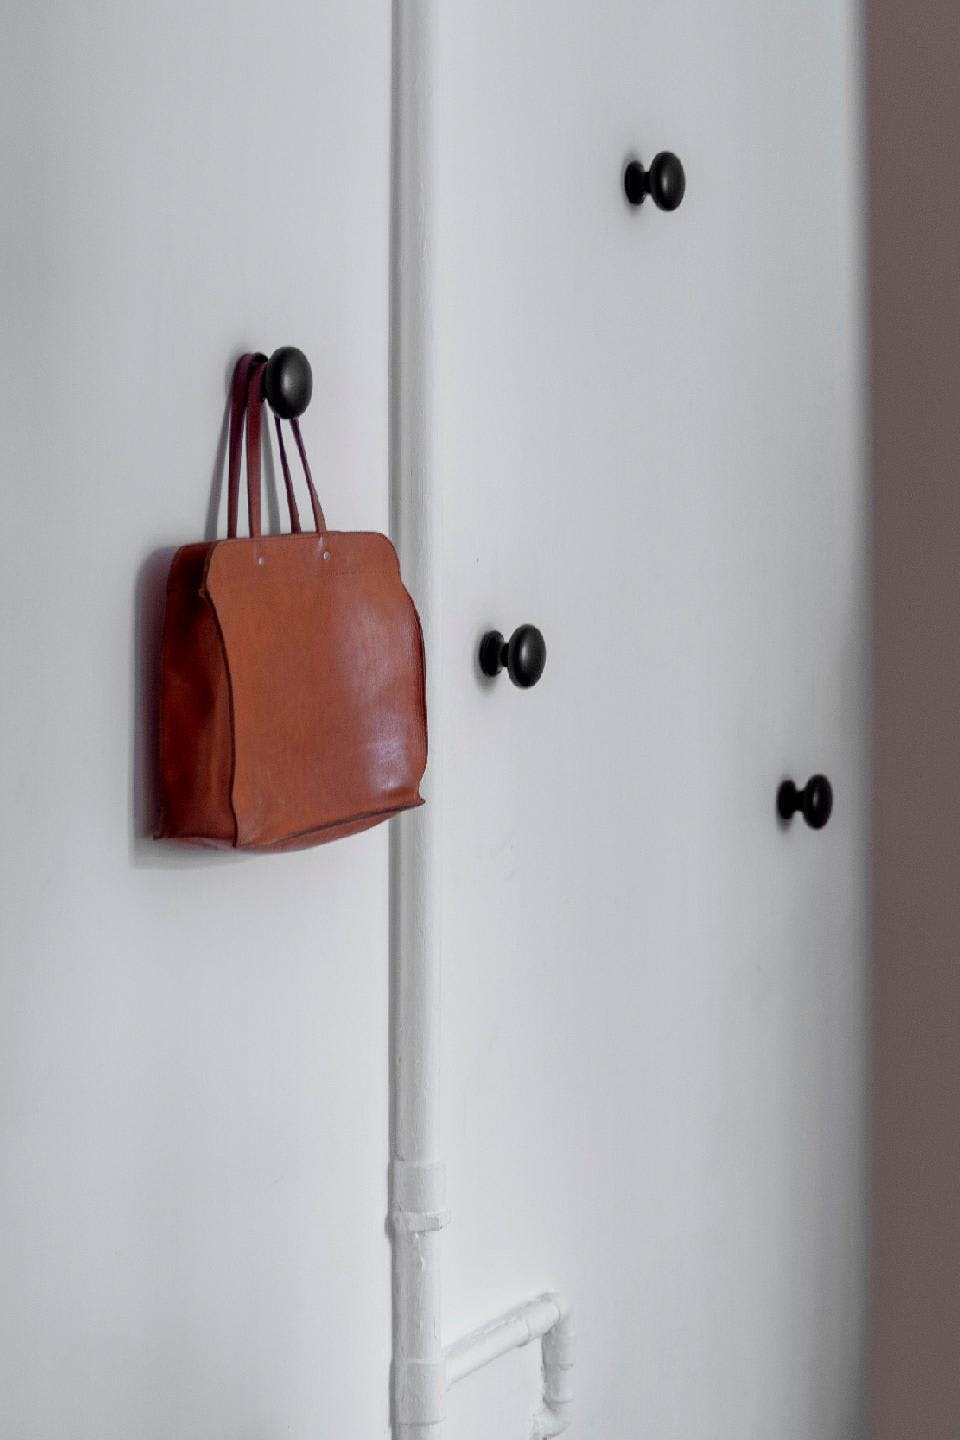 A white door with a brown leather bag hanging on it is shown in a room.